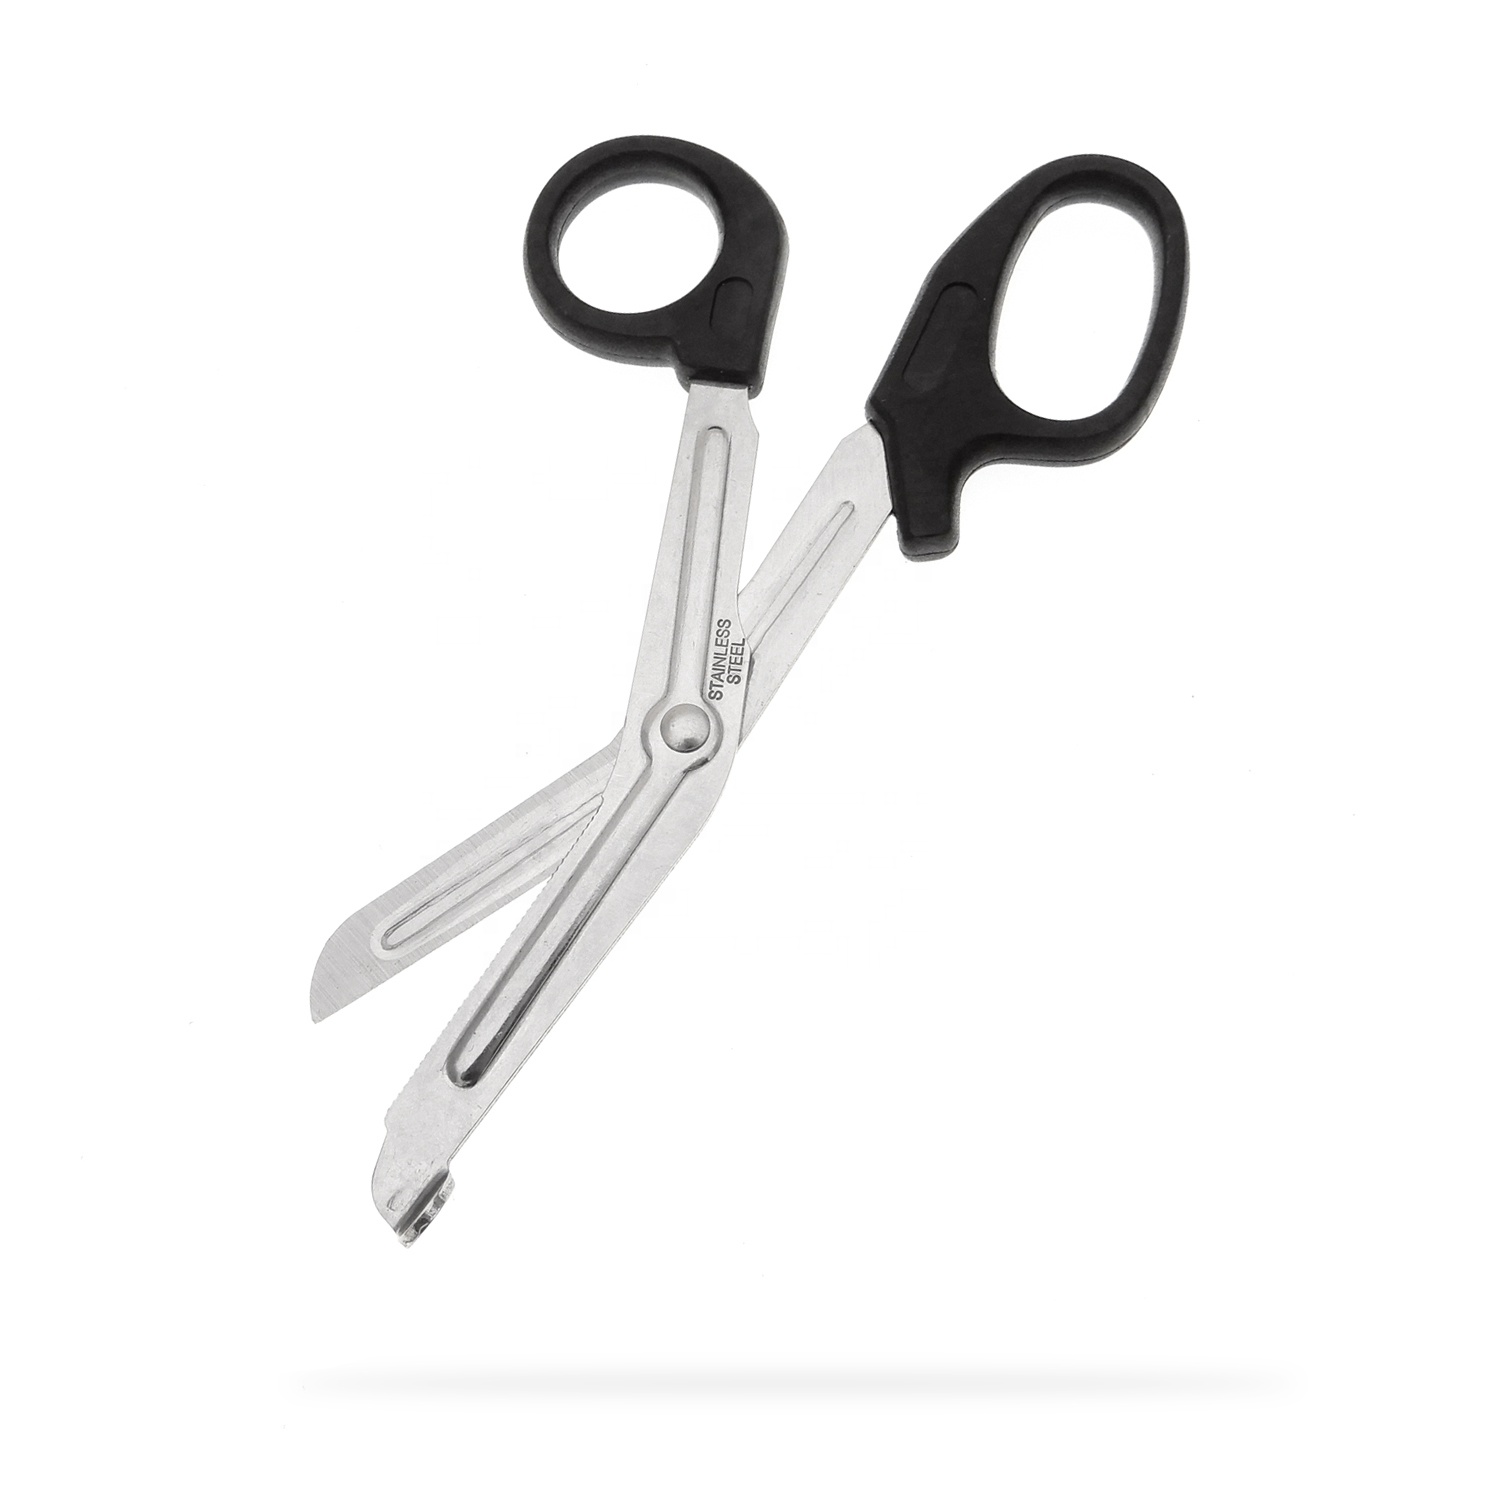 SA-003 Bend Bandage Scissors Household Gauze Clipper Stainless Steel Shears Safety Emergency Kits ABS Handle Home Improvement
